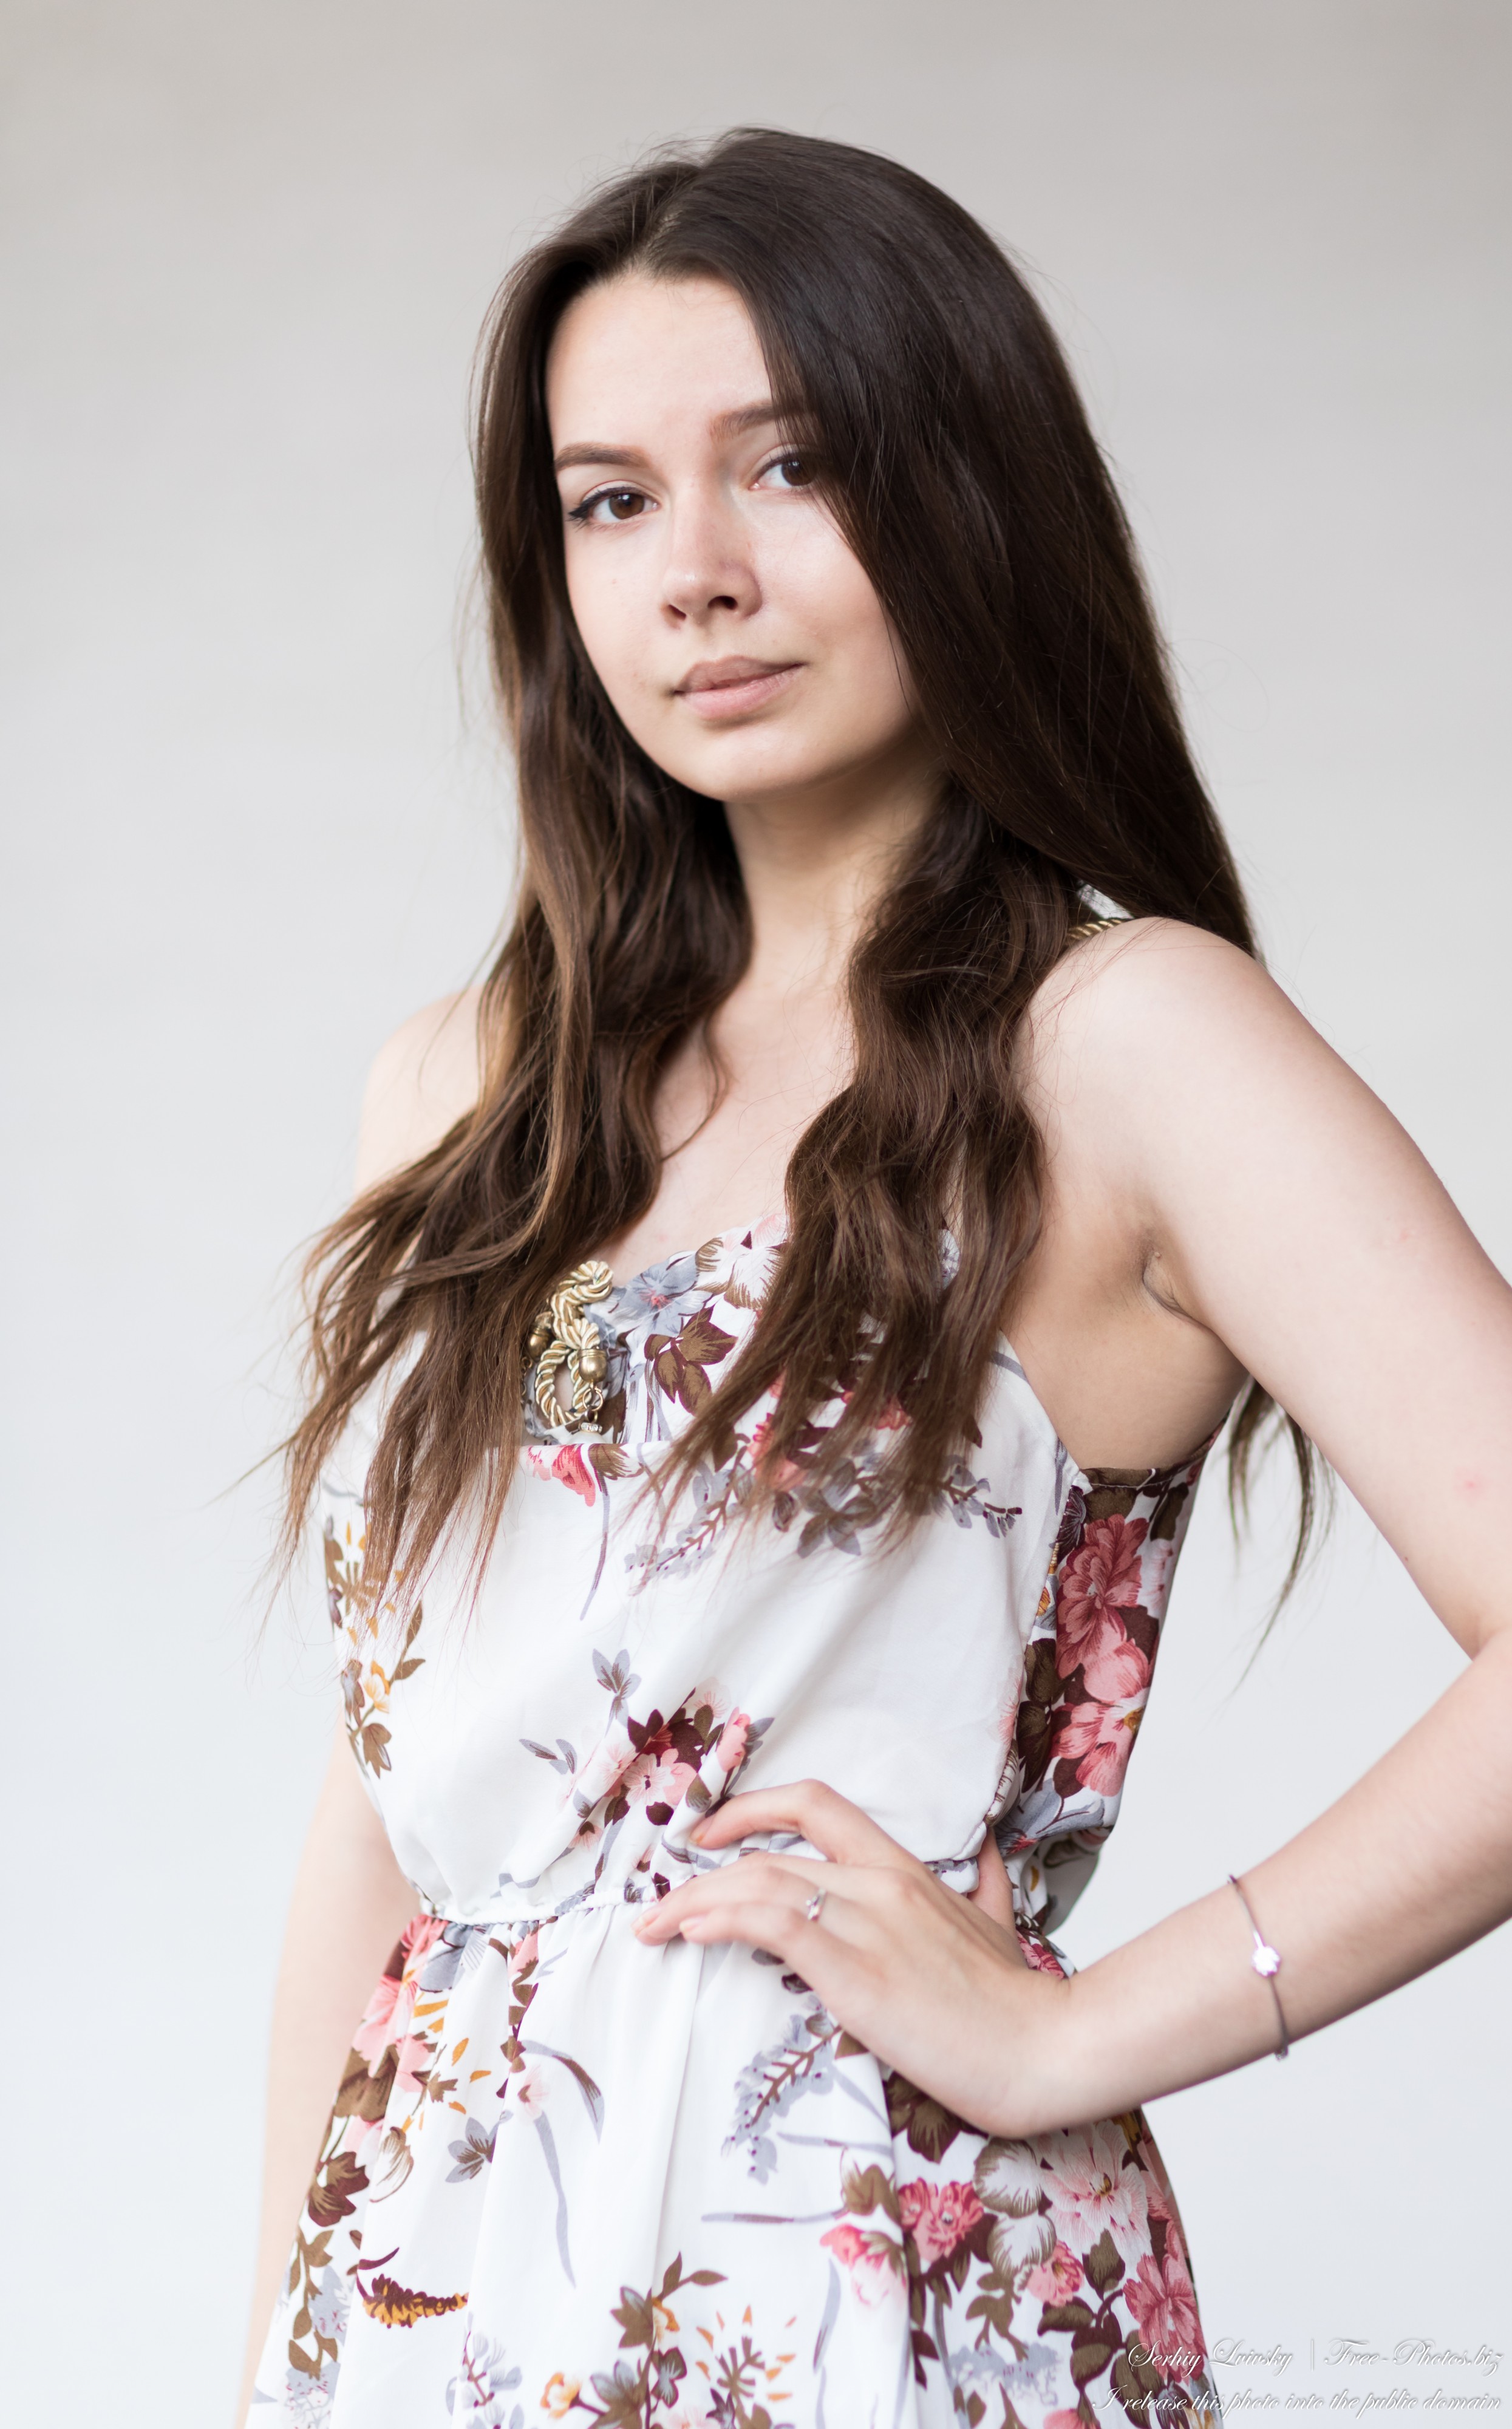 Photo Of Lida A 21 Year Old Girl Photographed By Serhiy Lvivsky In June 2020 Photograph 2